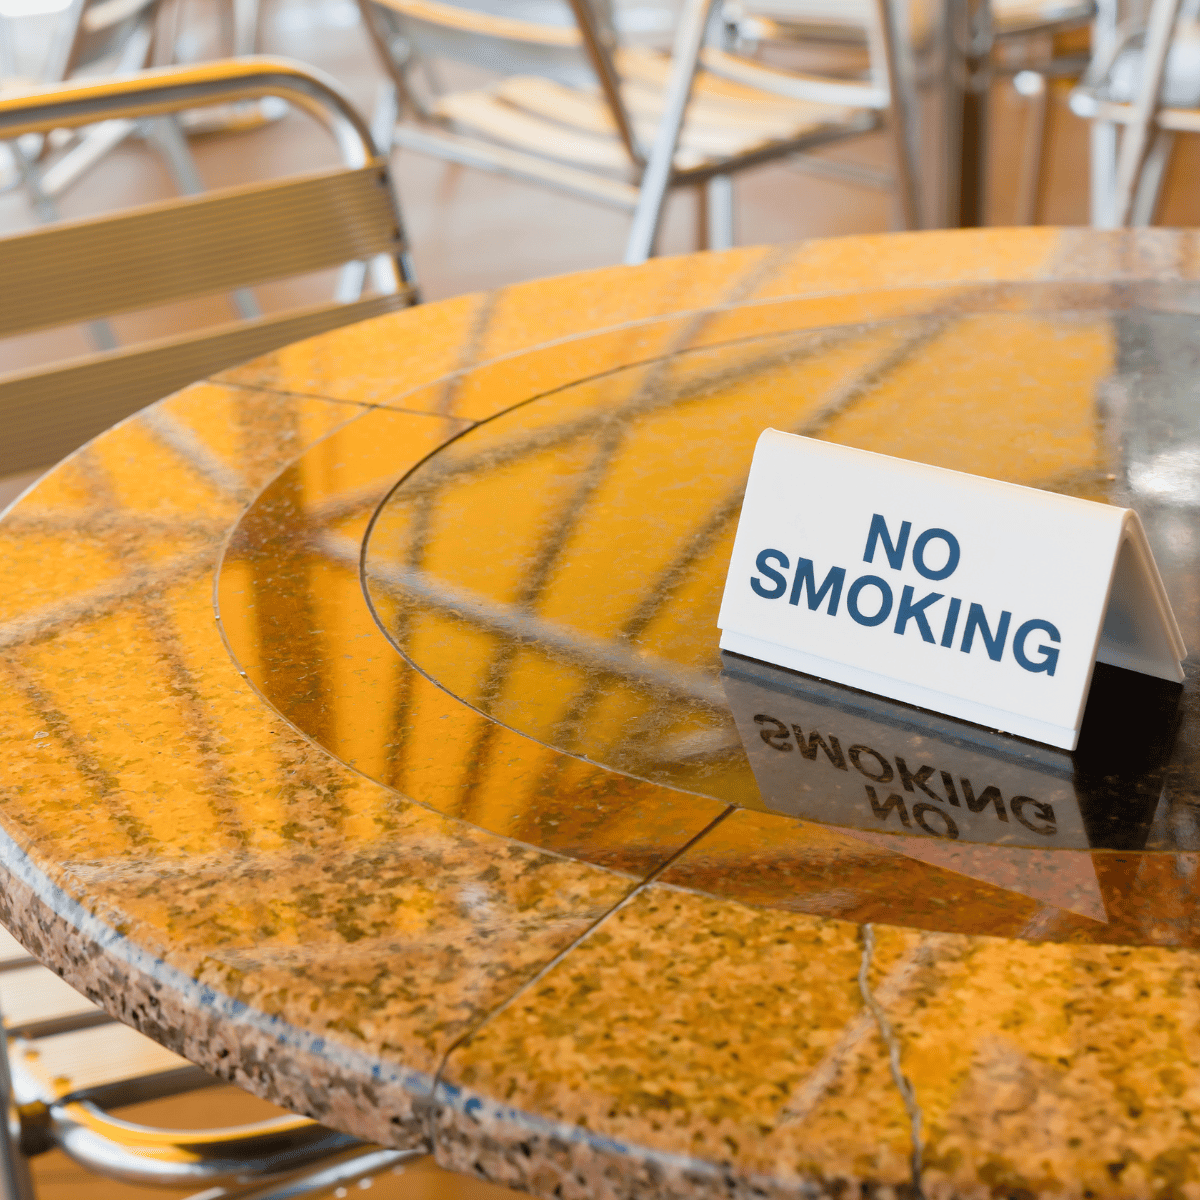 No smoking sign on a table